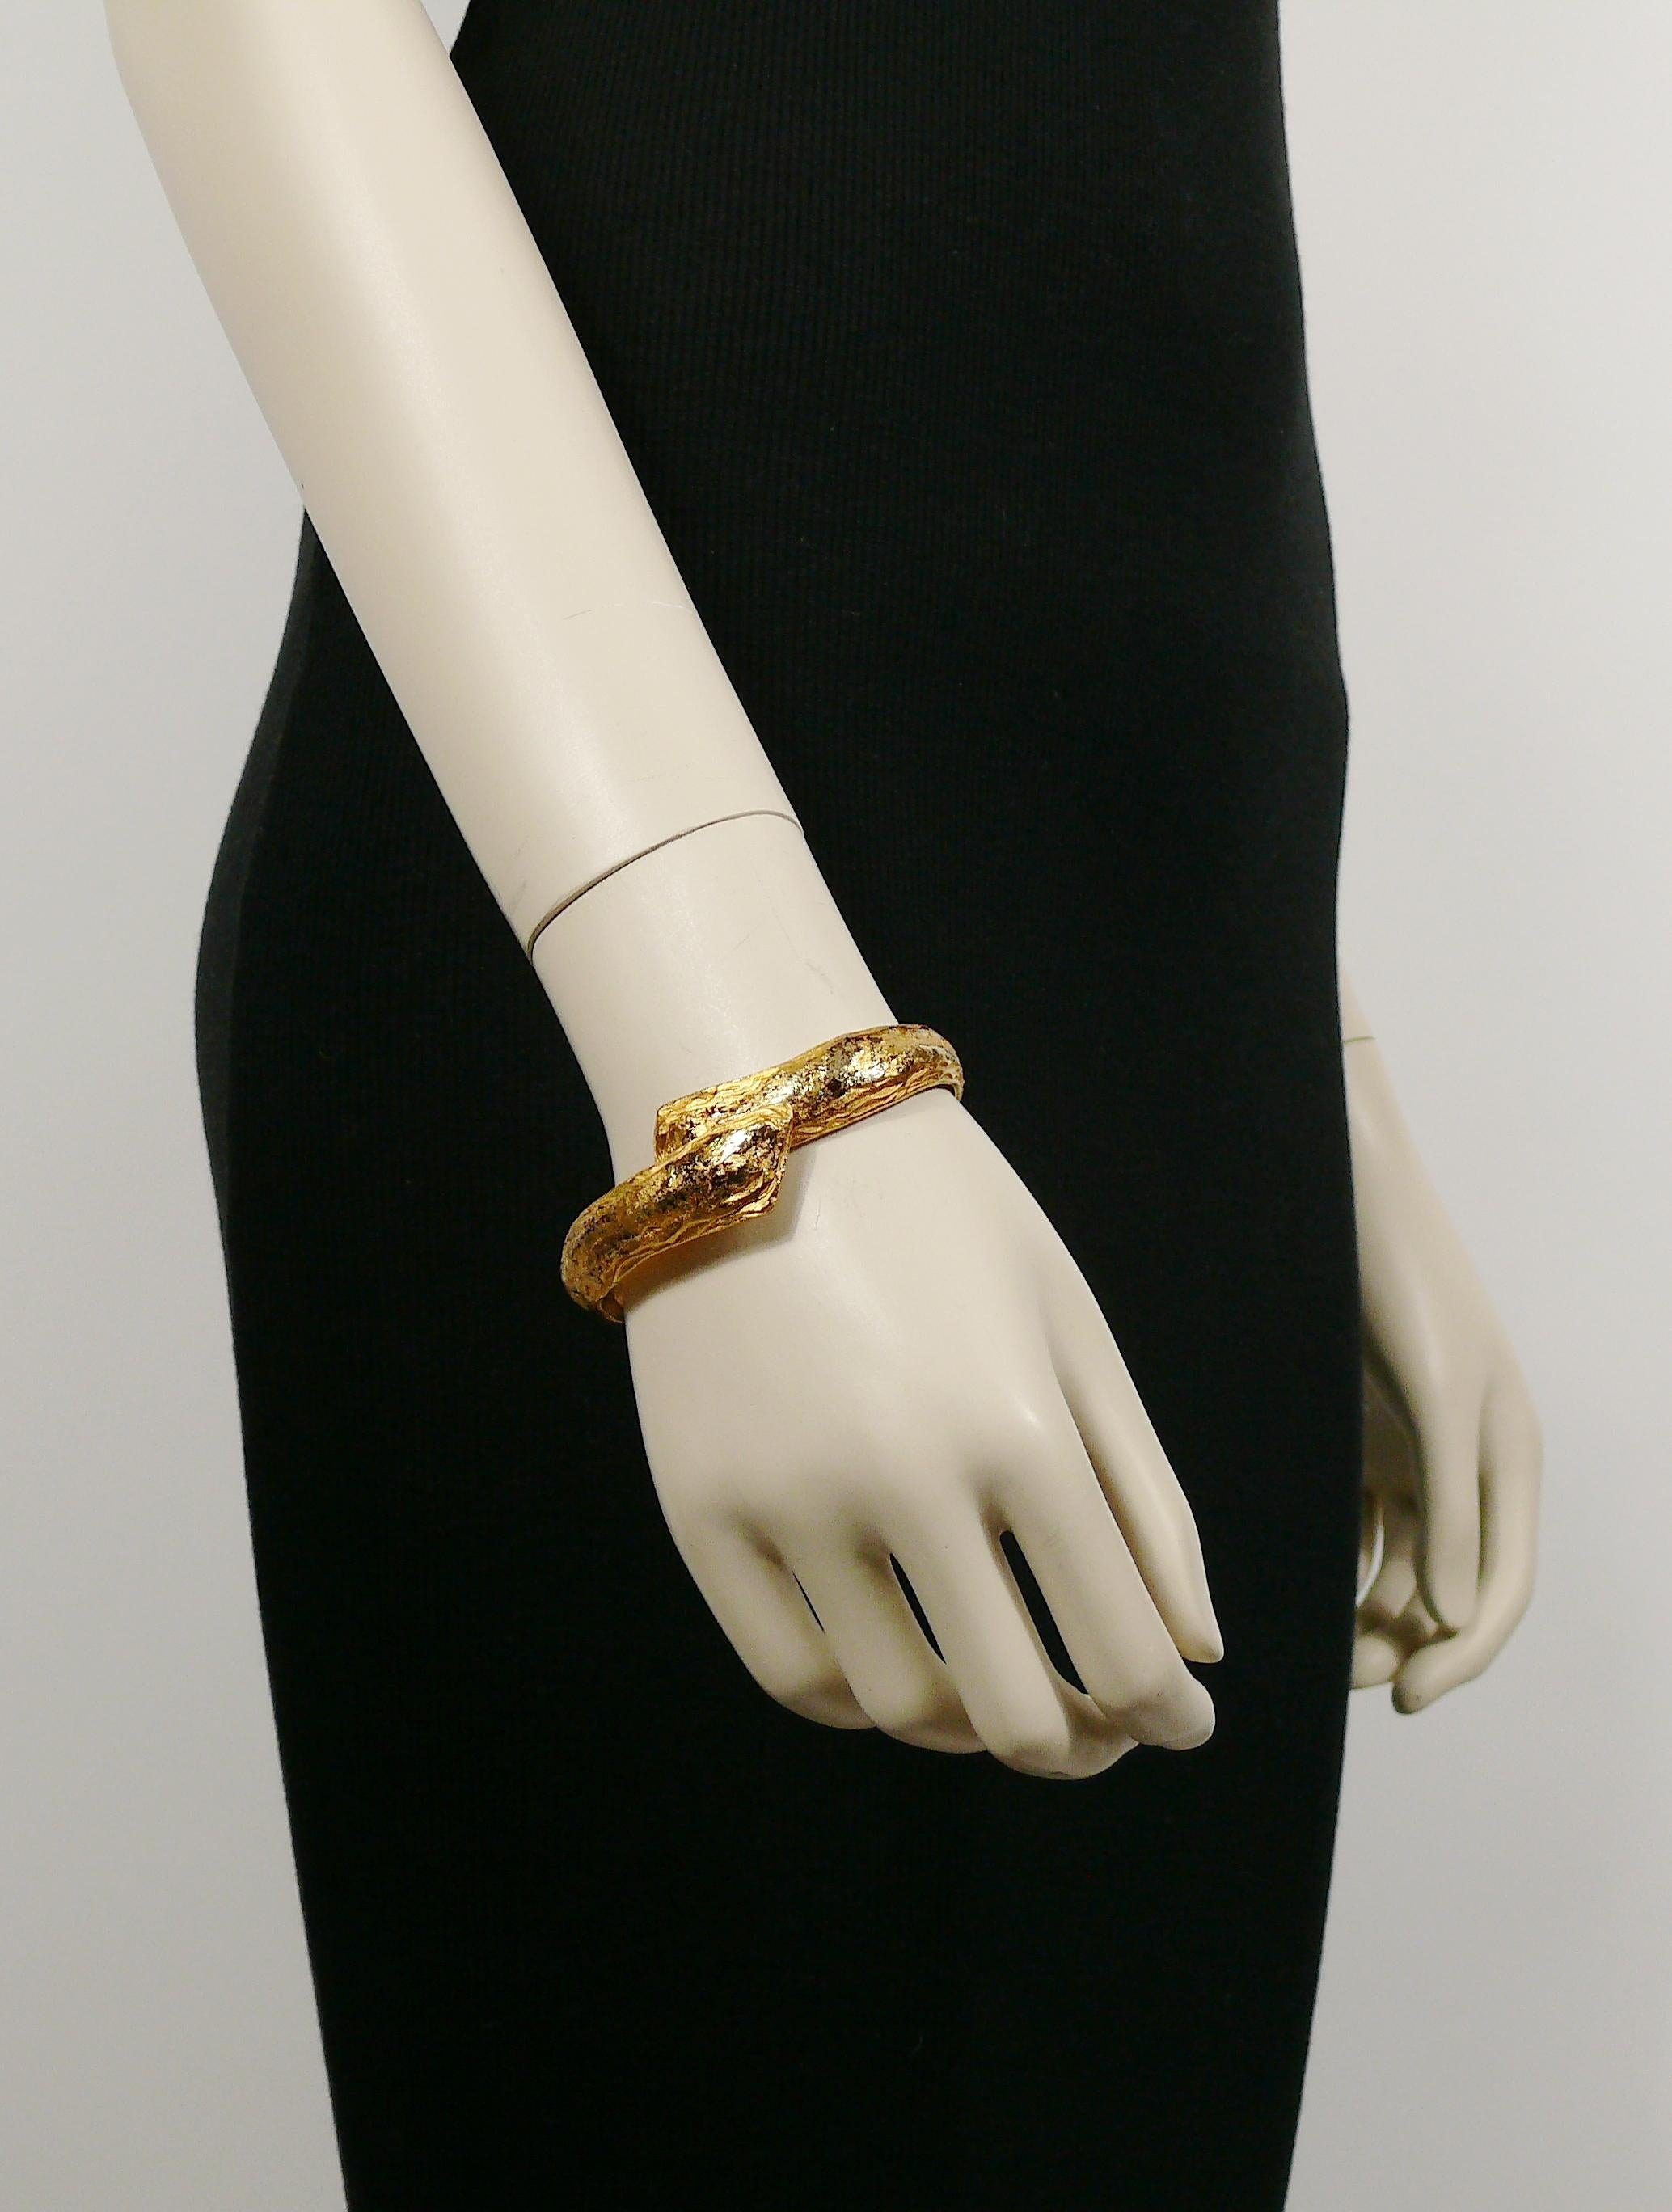 YVES SAINT LAURENT vintage distressed gold toned clamper bracelet.

Marked YSL Made in France.

Indicative measurements : inner measurements (without extension) approx. 6 cm x 4.5 cm (2.36 inches x 1.77 inches) / max width approx. 1.5 cm (0.59